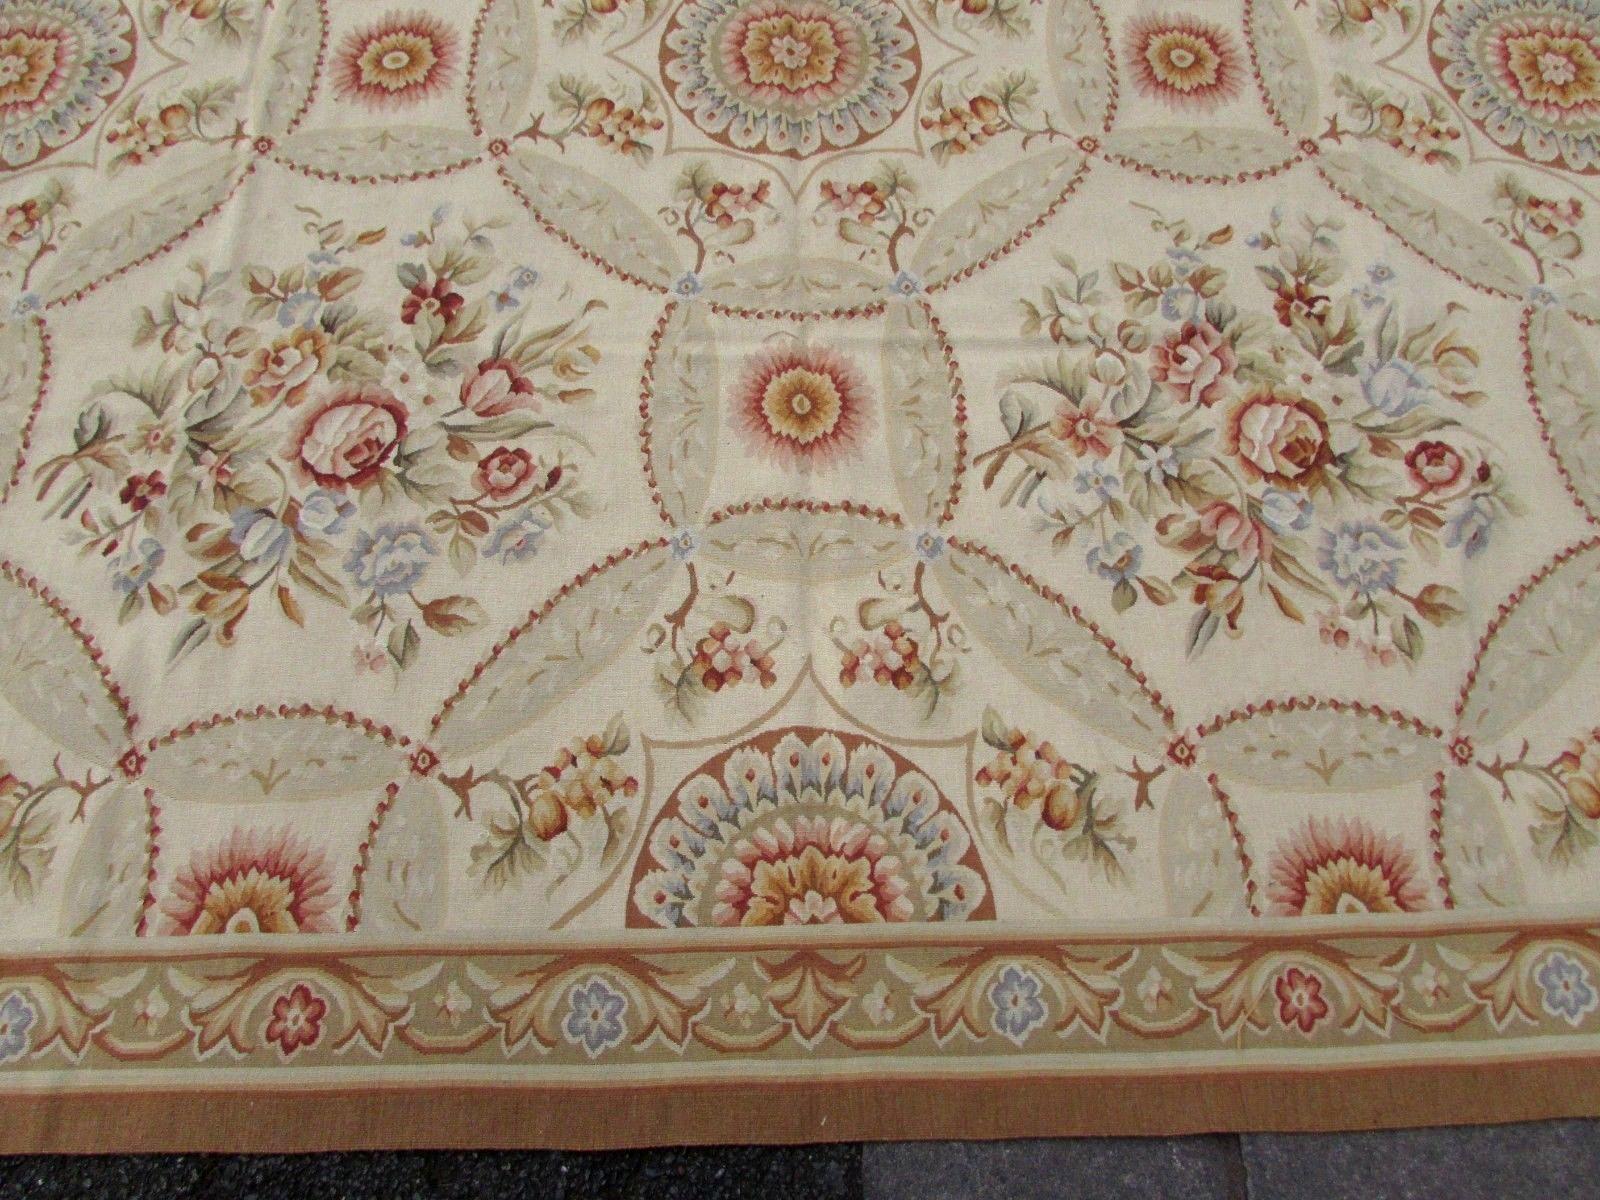 Handmade vintage French Aubusson rug in wool. This rug has been made in the end of 20th century, it is in original good condition.

-Condition: Original good,

-circa 1970s,

-Size: 9.1' x 12.4' (273cm x 371cm),

-Material: Wool,

-Country